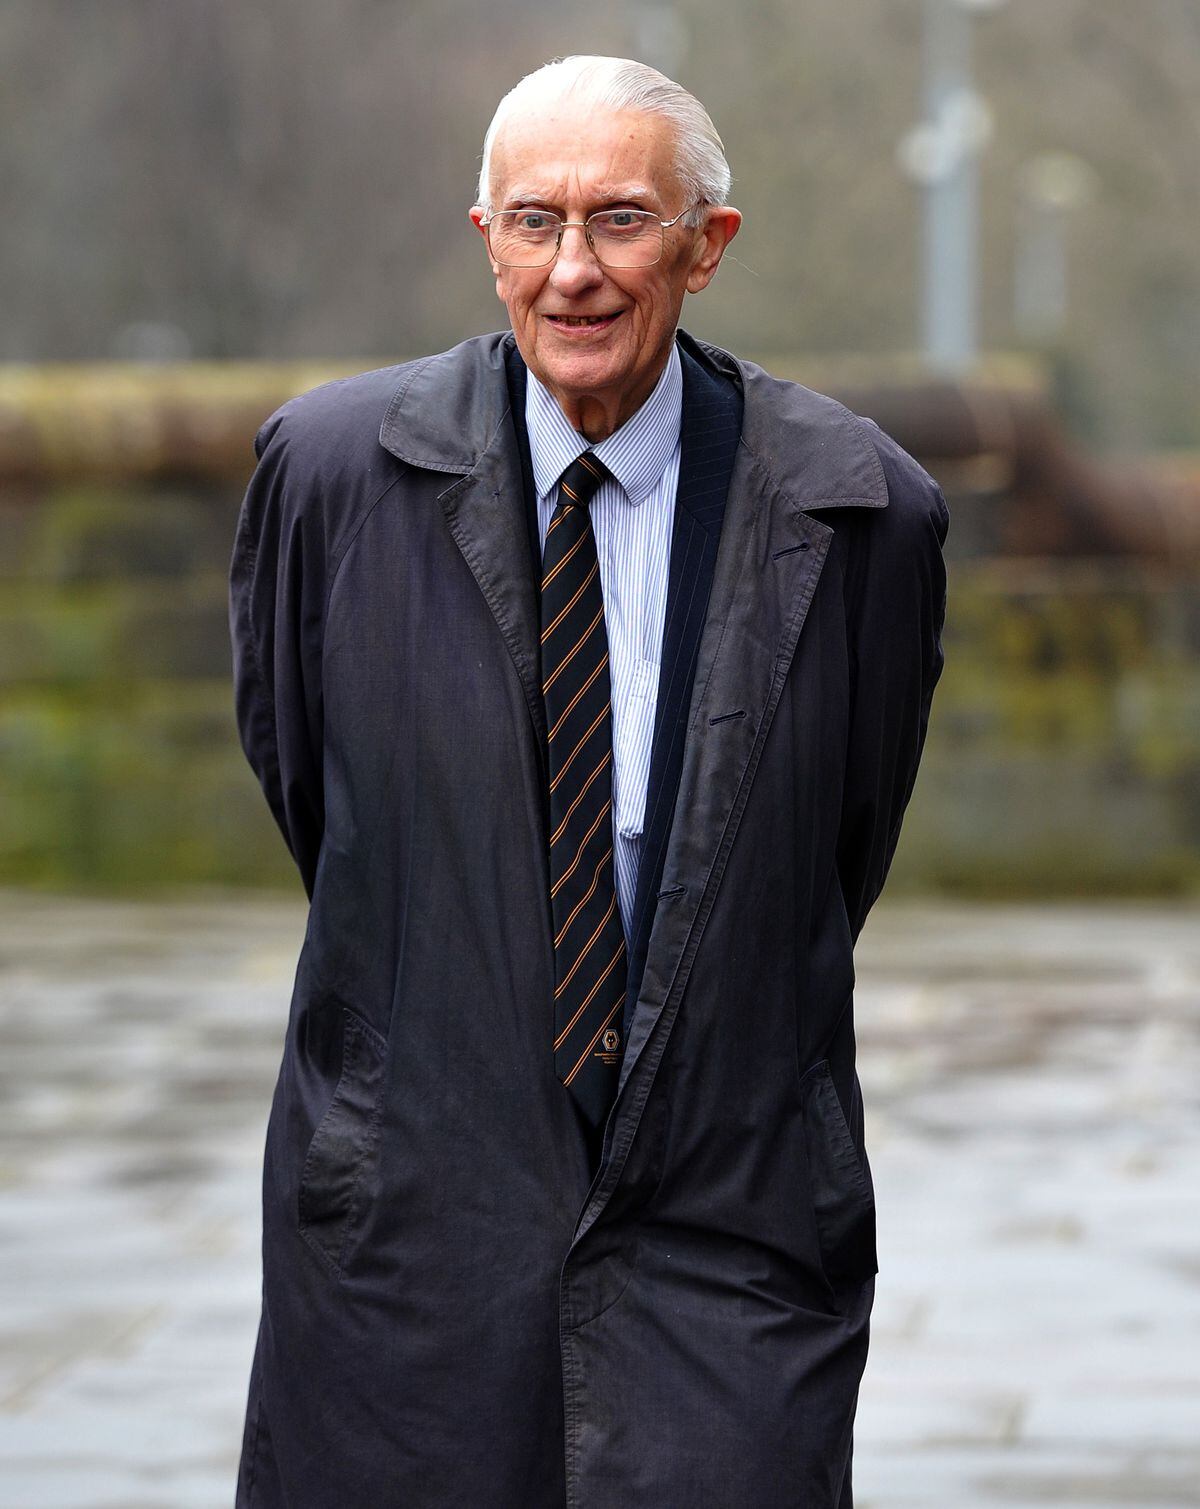 Peter Creed at Rachael Heyhoe Flint's funeral in February 2017